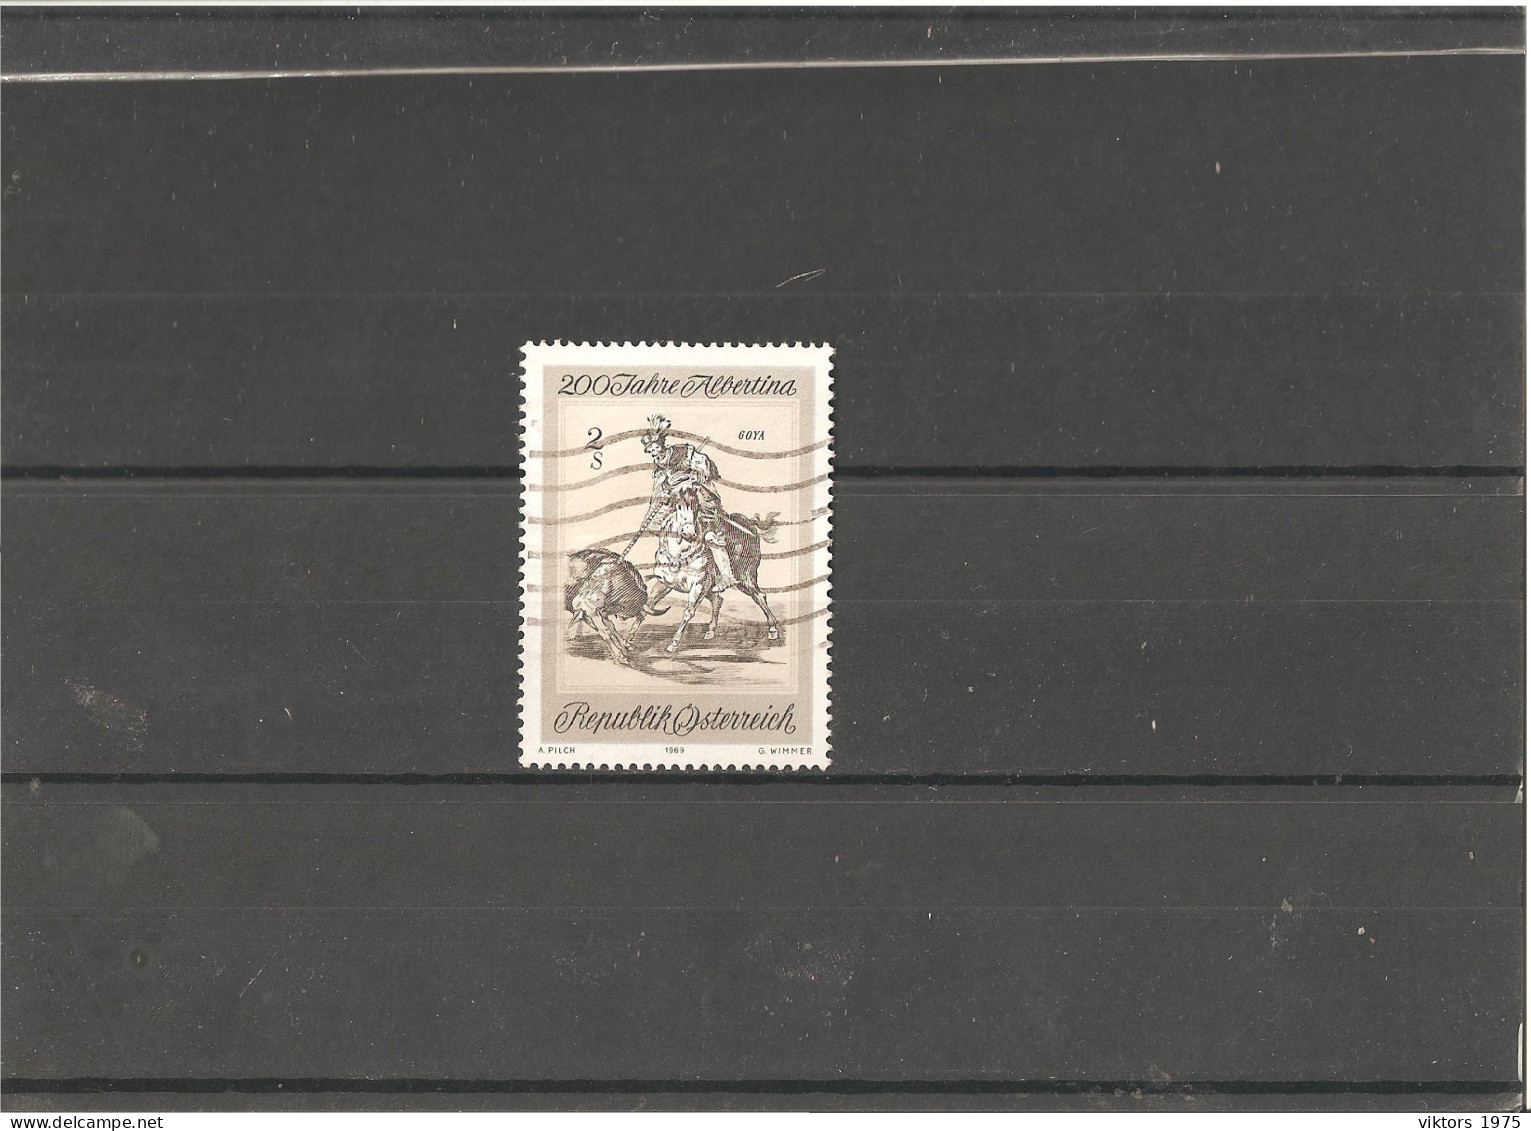 Used Stamp Nr.1307 In MICHEL Catalog - Used Stamps